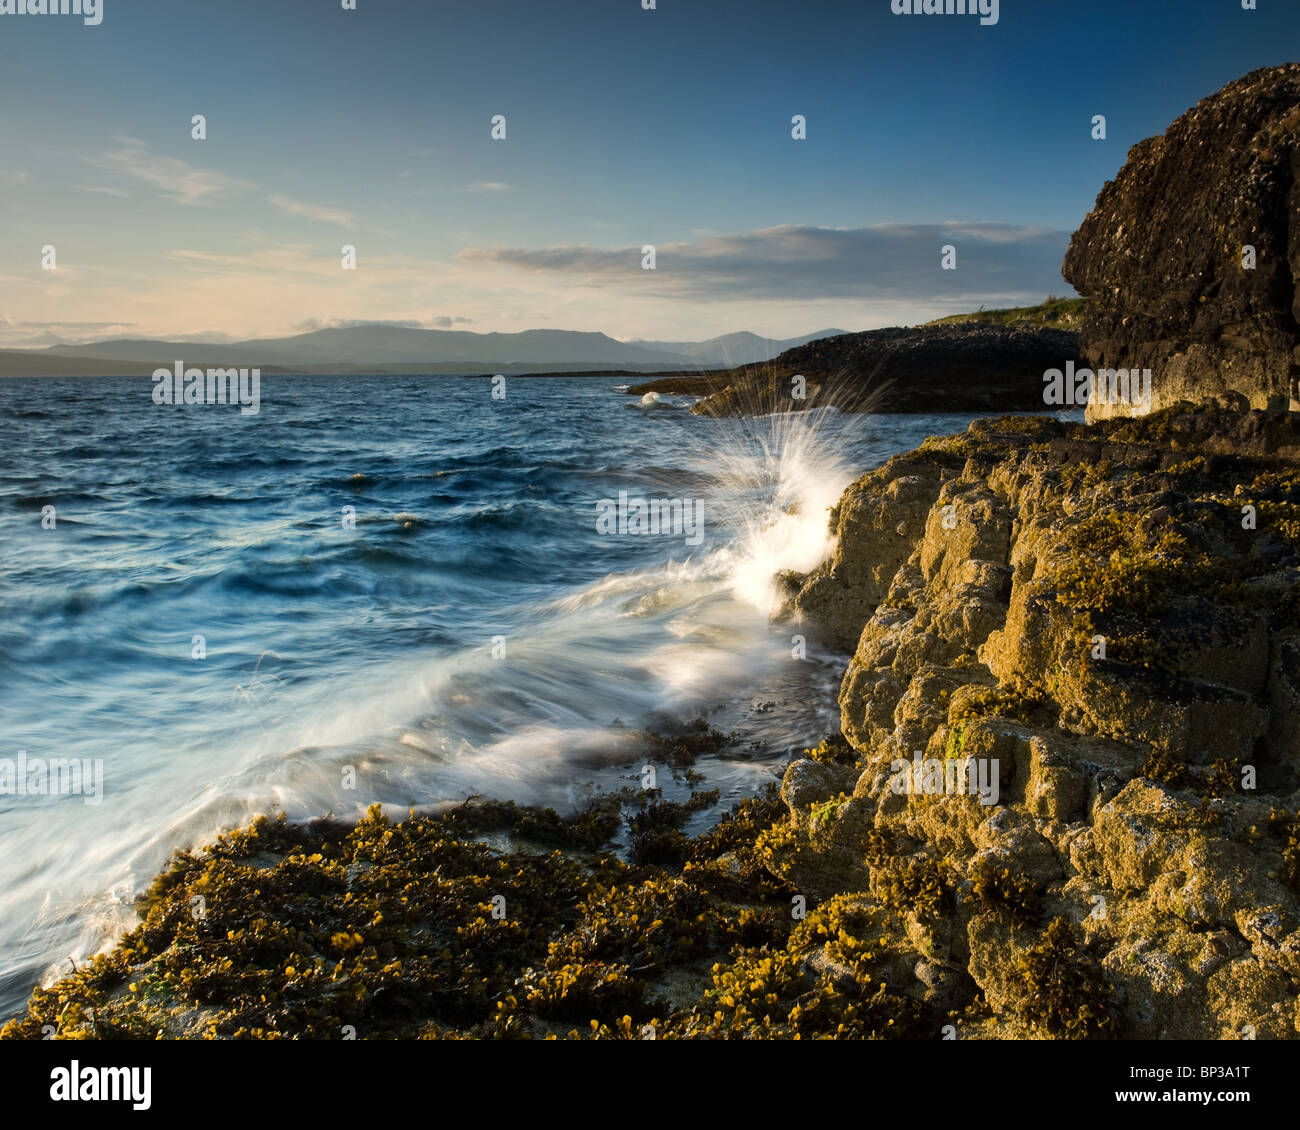 Waves breaking on rocky shore in the evening light Stock Photo